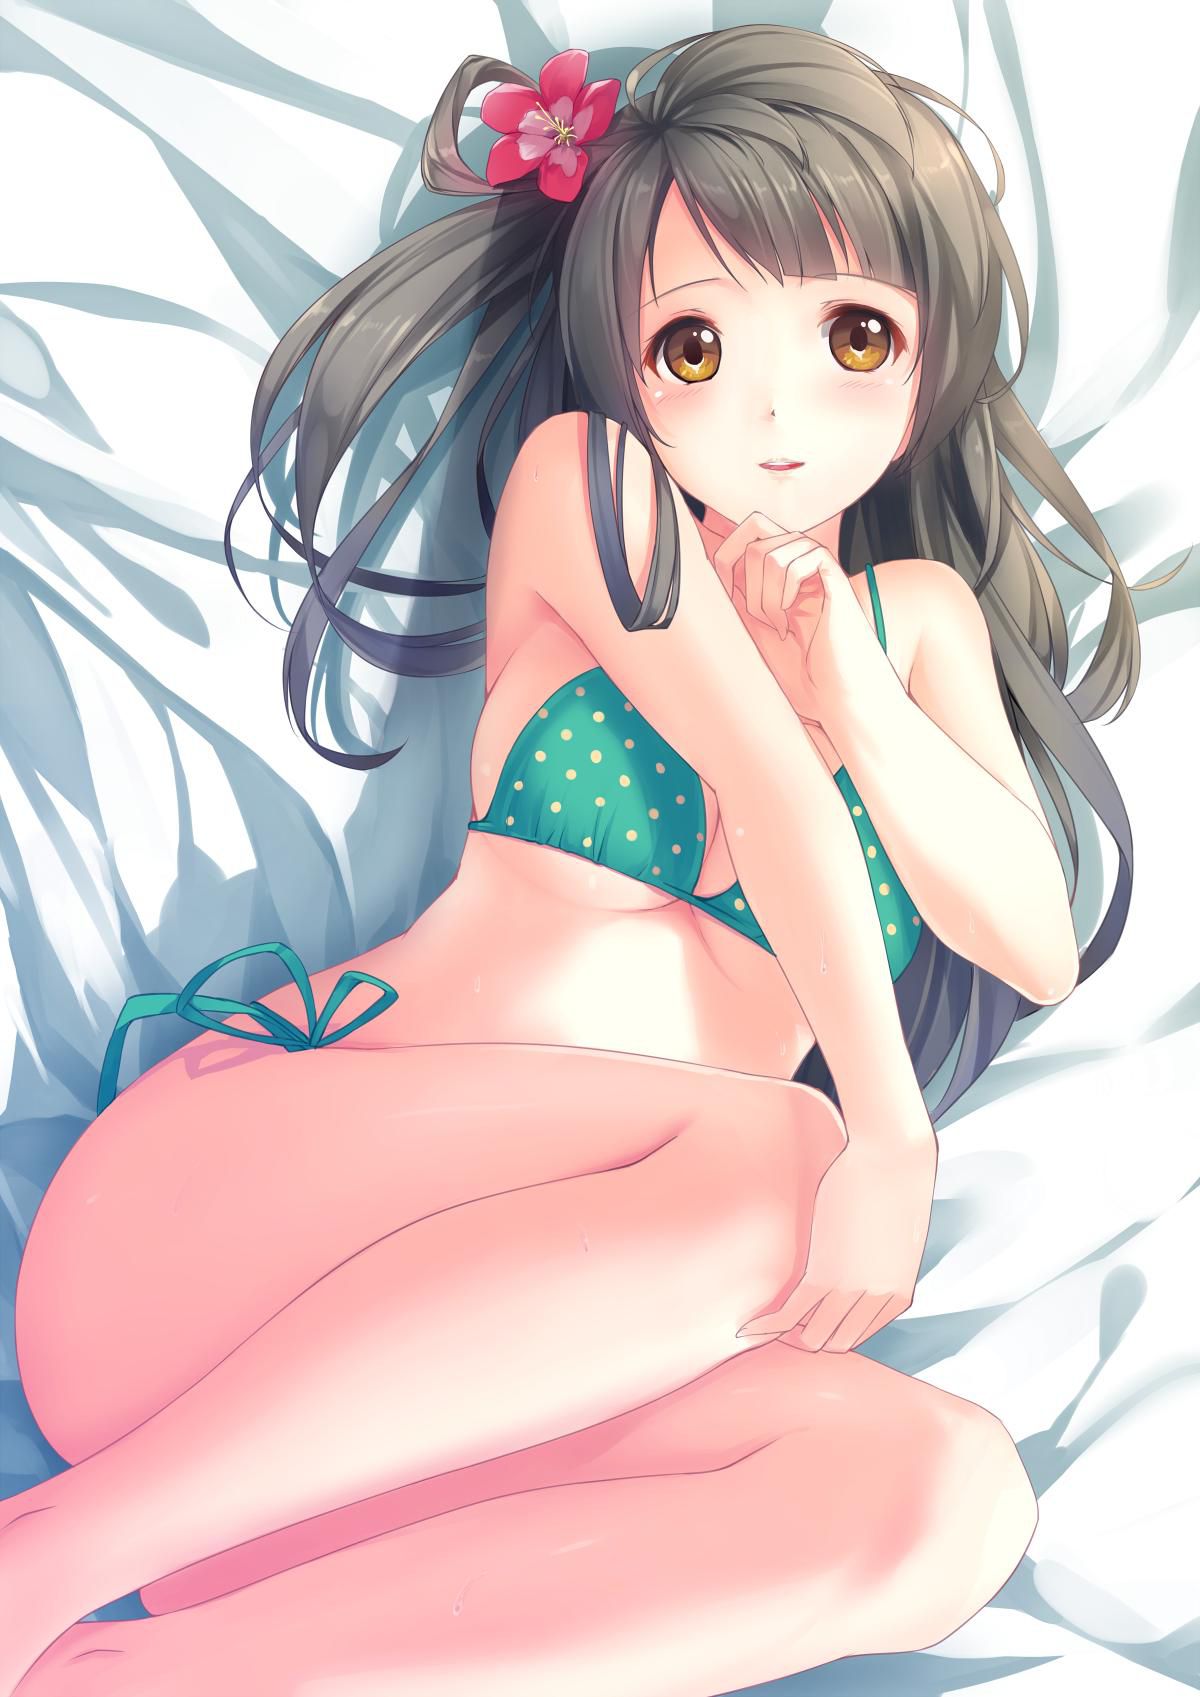 Two-dimensional beautiful girl's Erokawa image is pasted intently vol.944 6